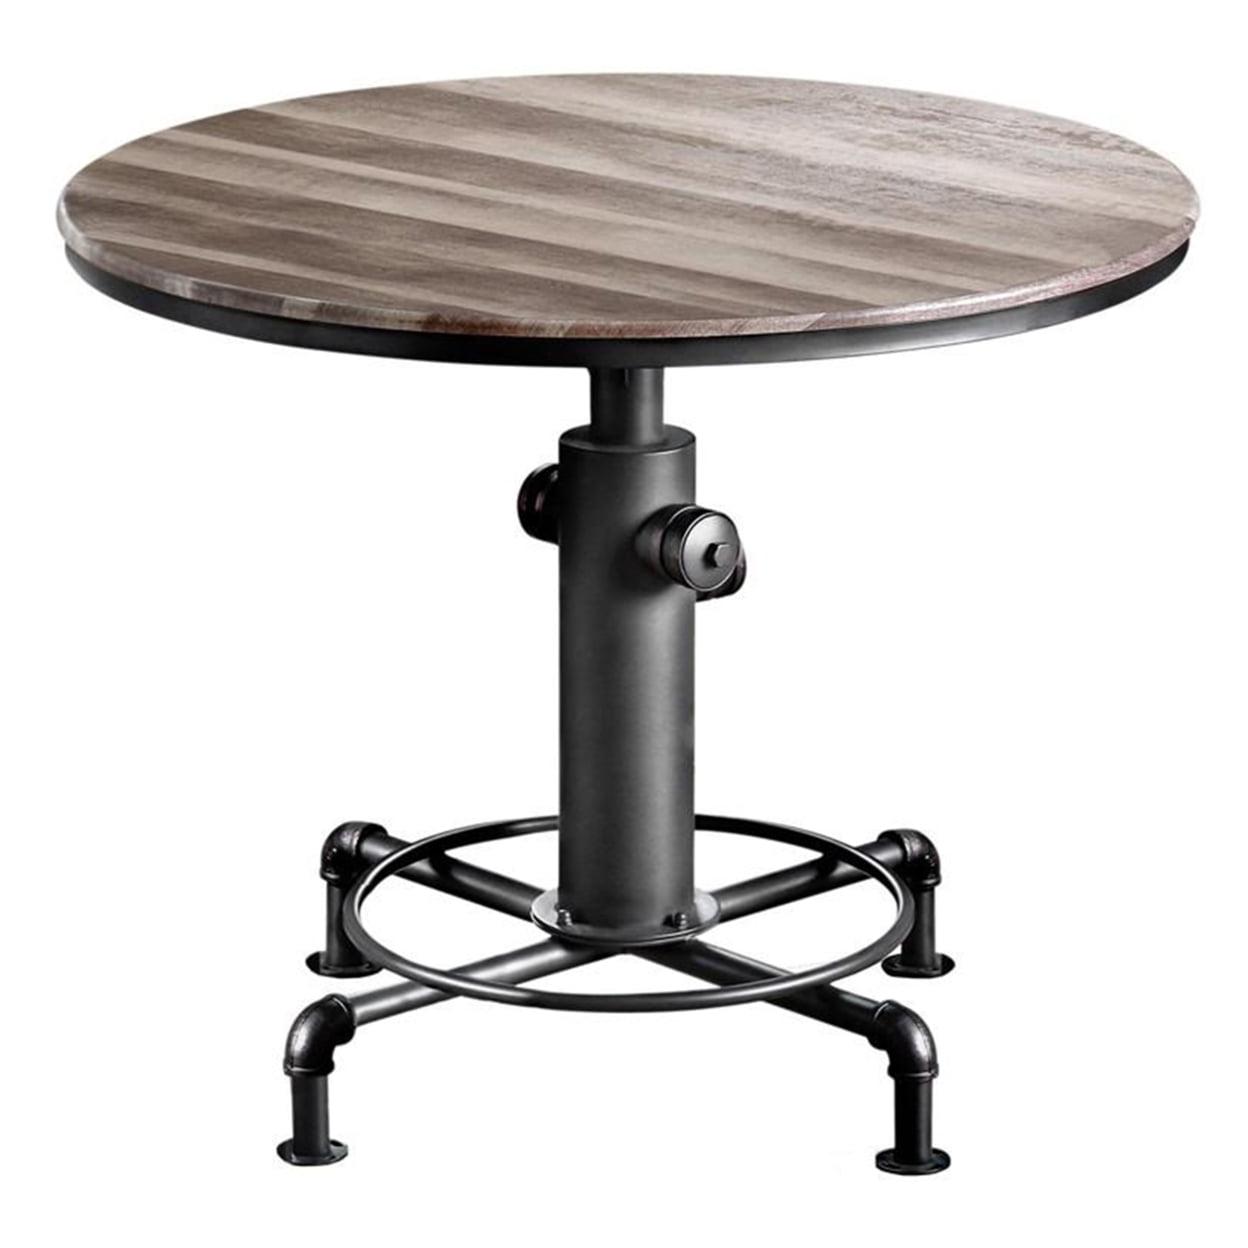 Round 45" Industrial Wood Counter Height Dining Table with Fire Hydrant Base